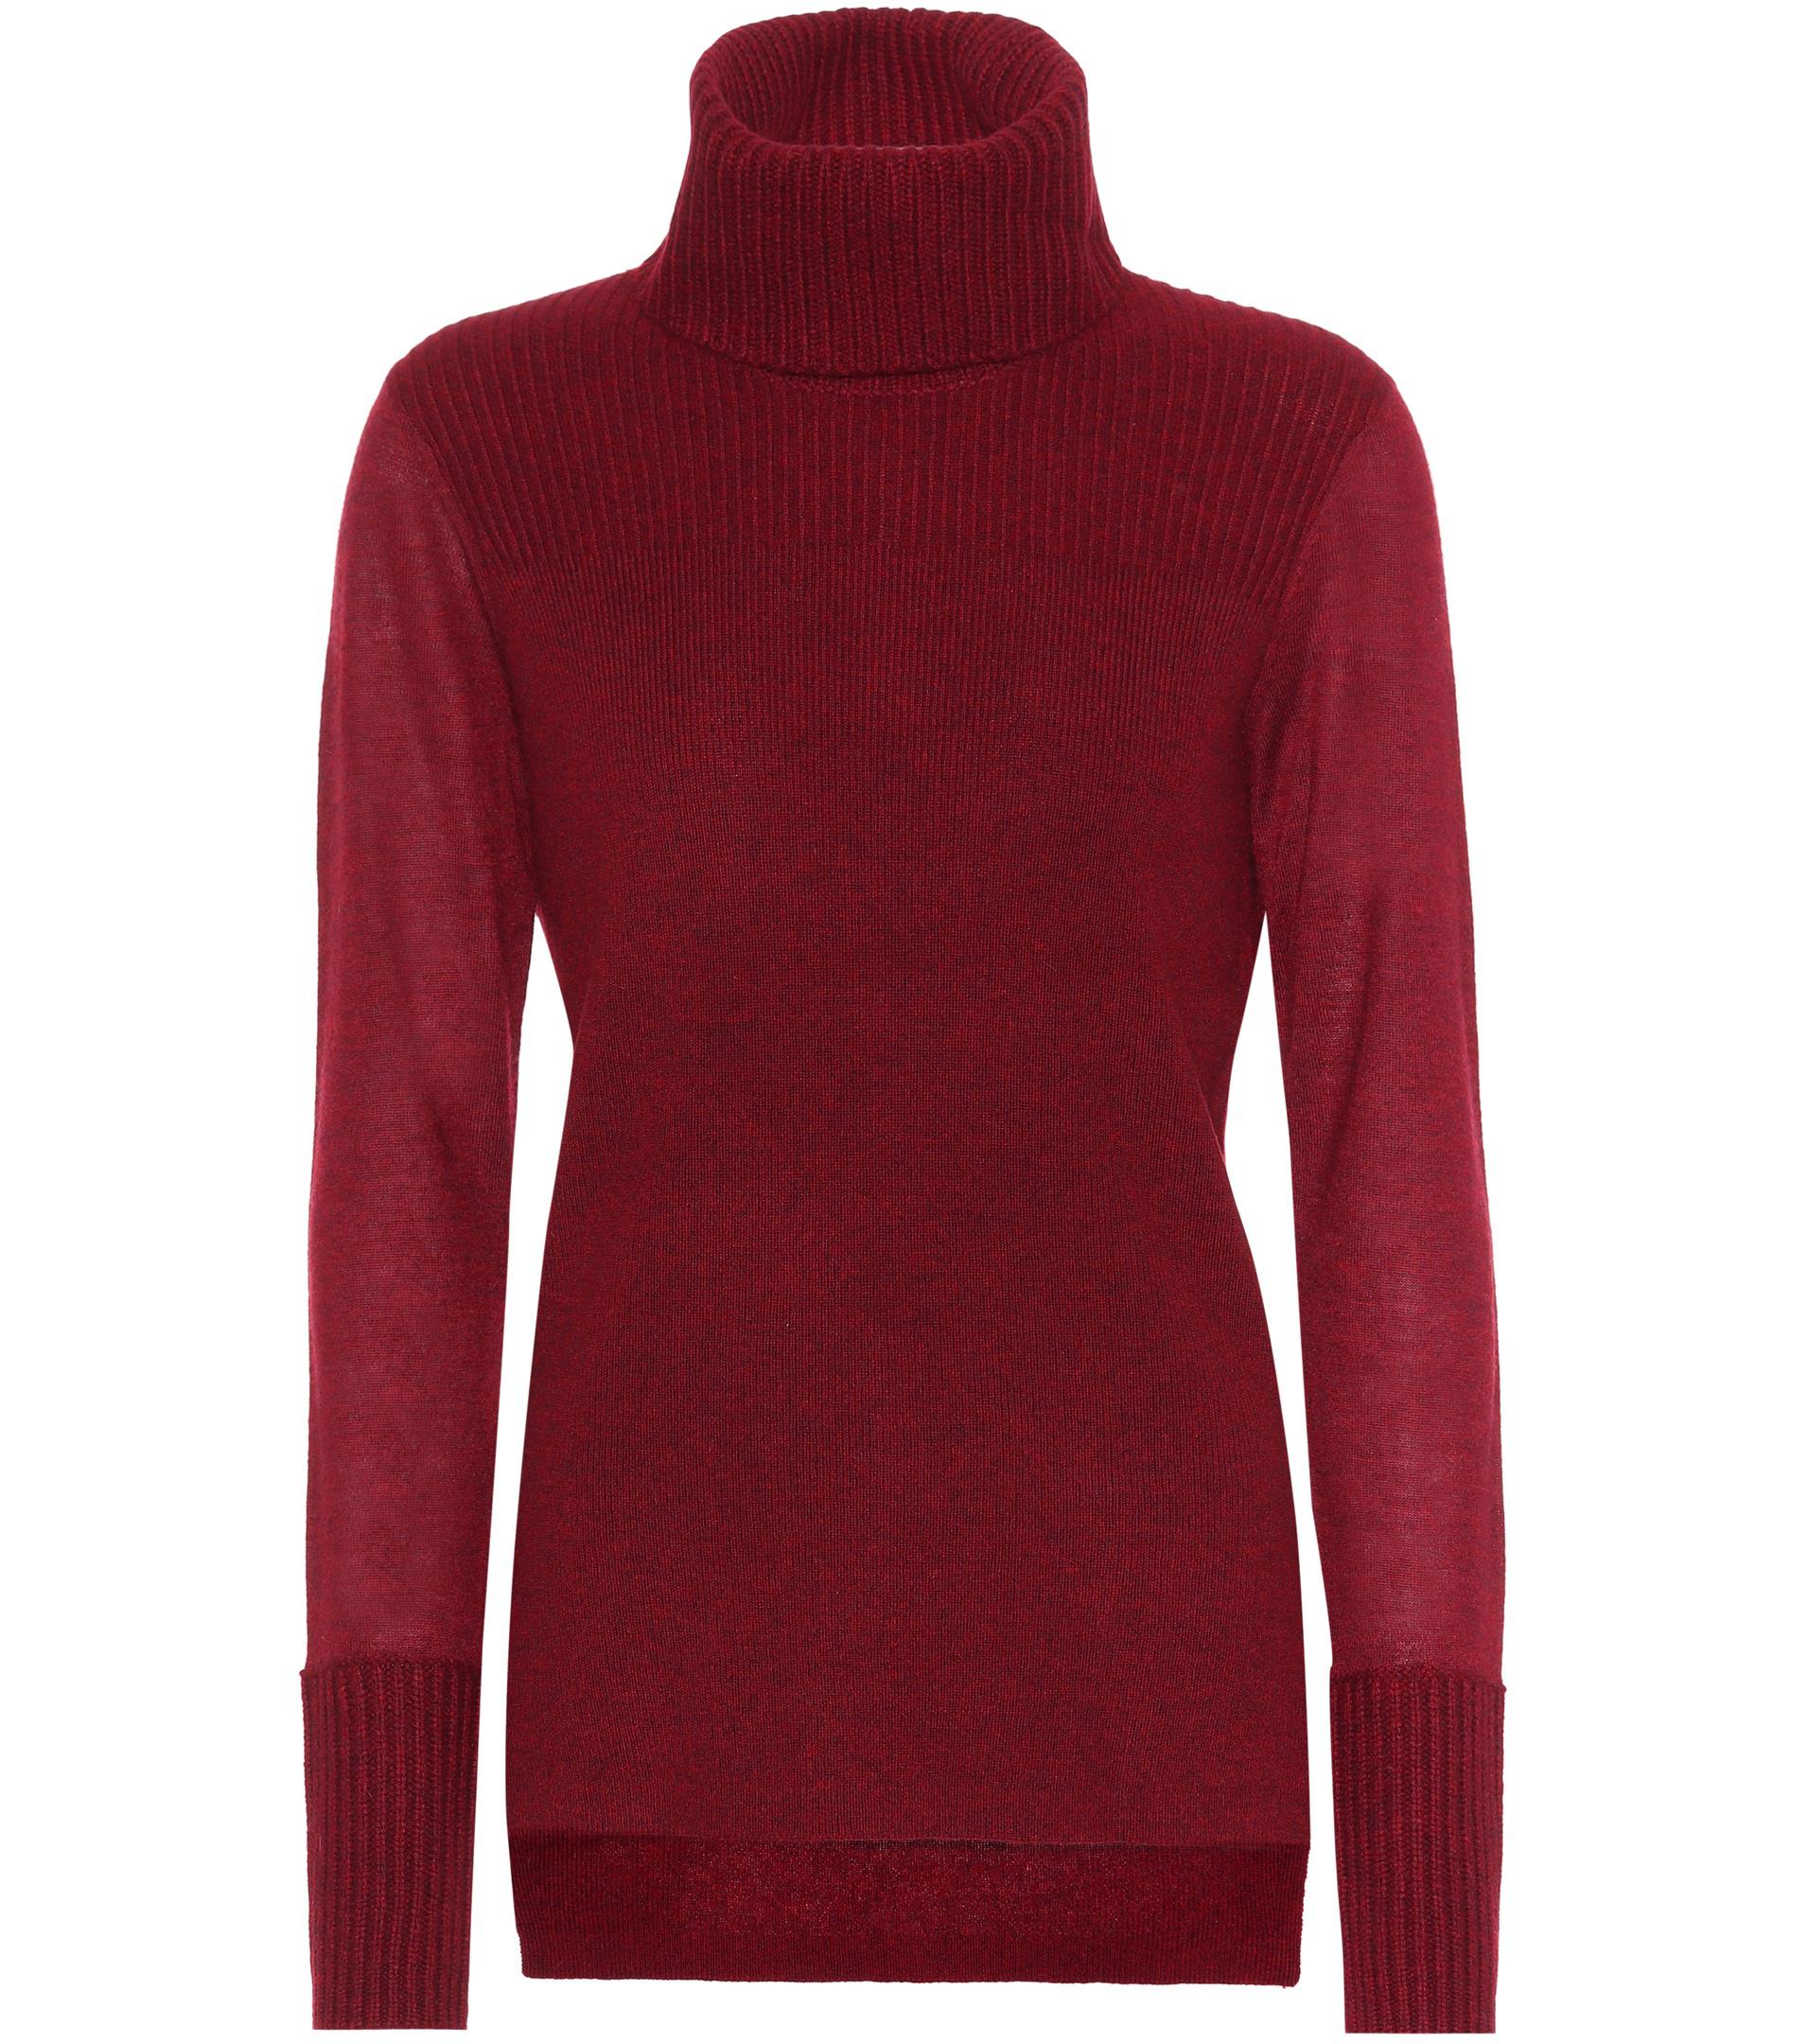 Veronica beard Cashmere Turtleneck Sweater in Red | Lyst